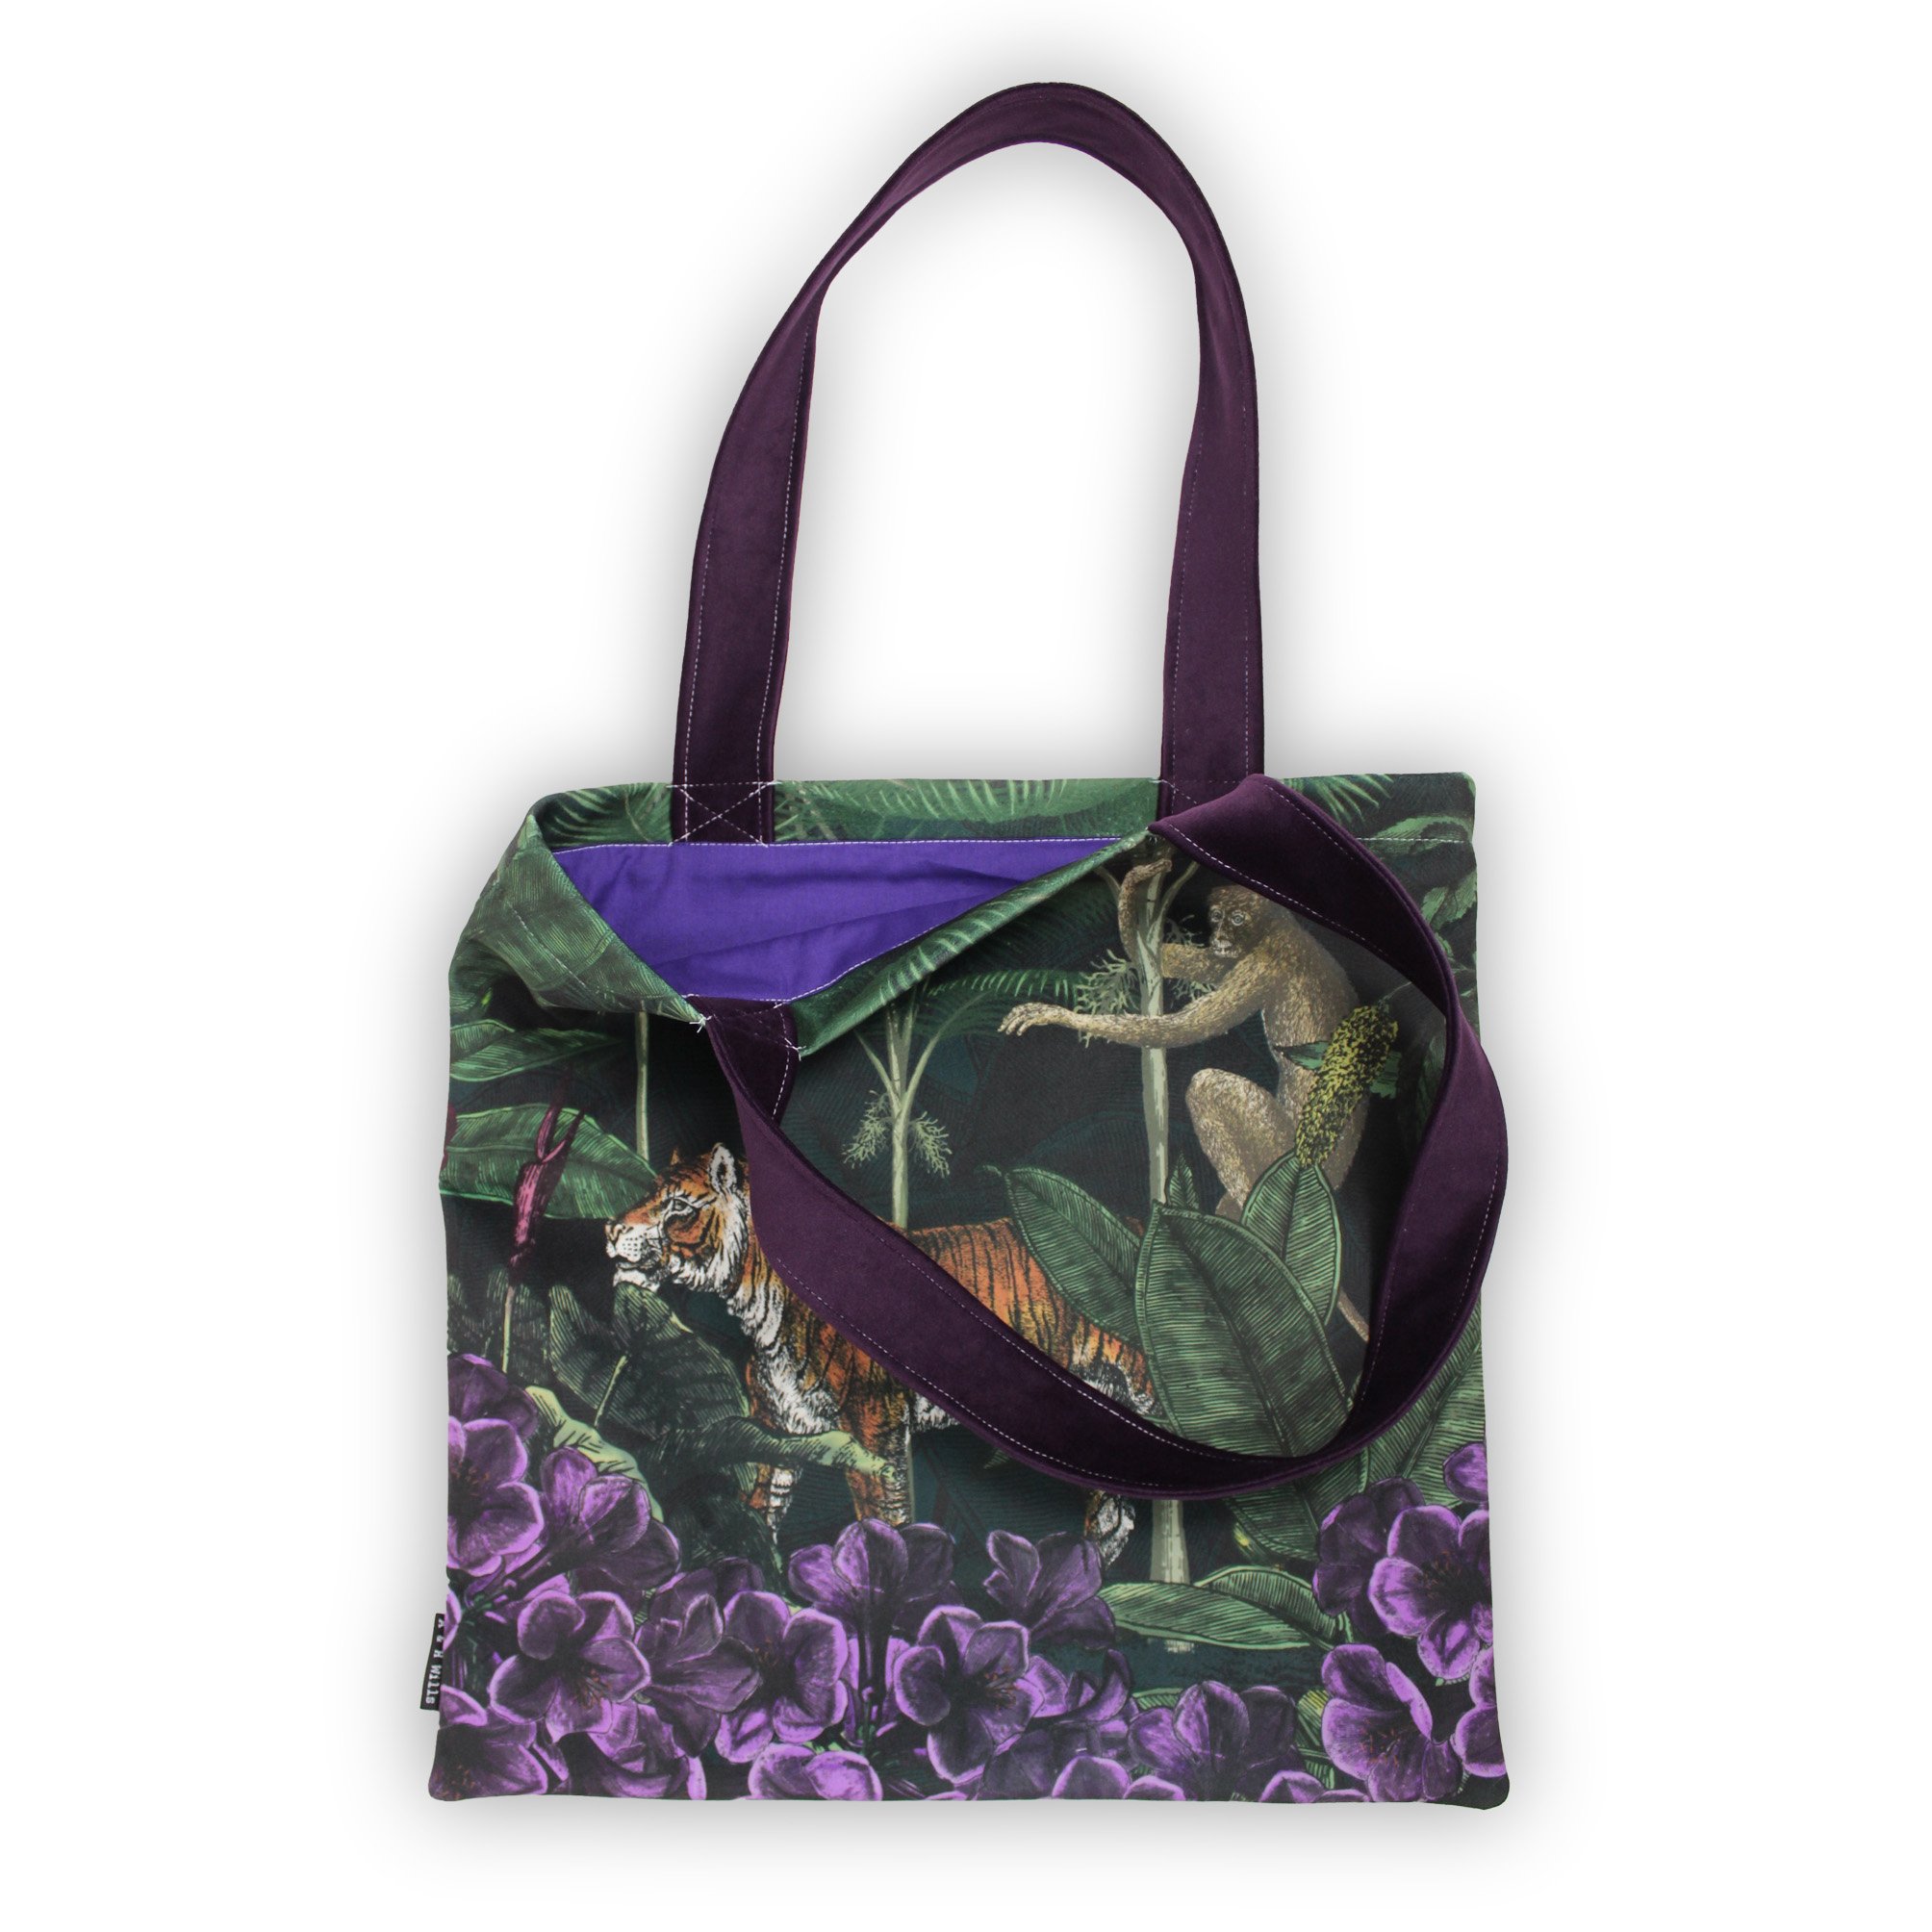 jungle tote with purple lining detail.jpg